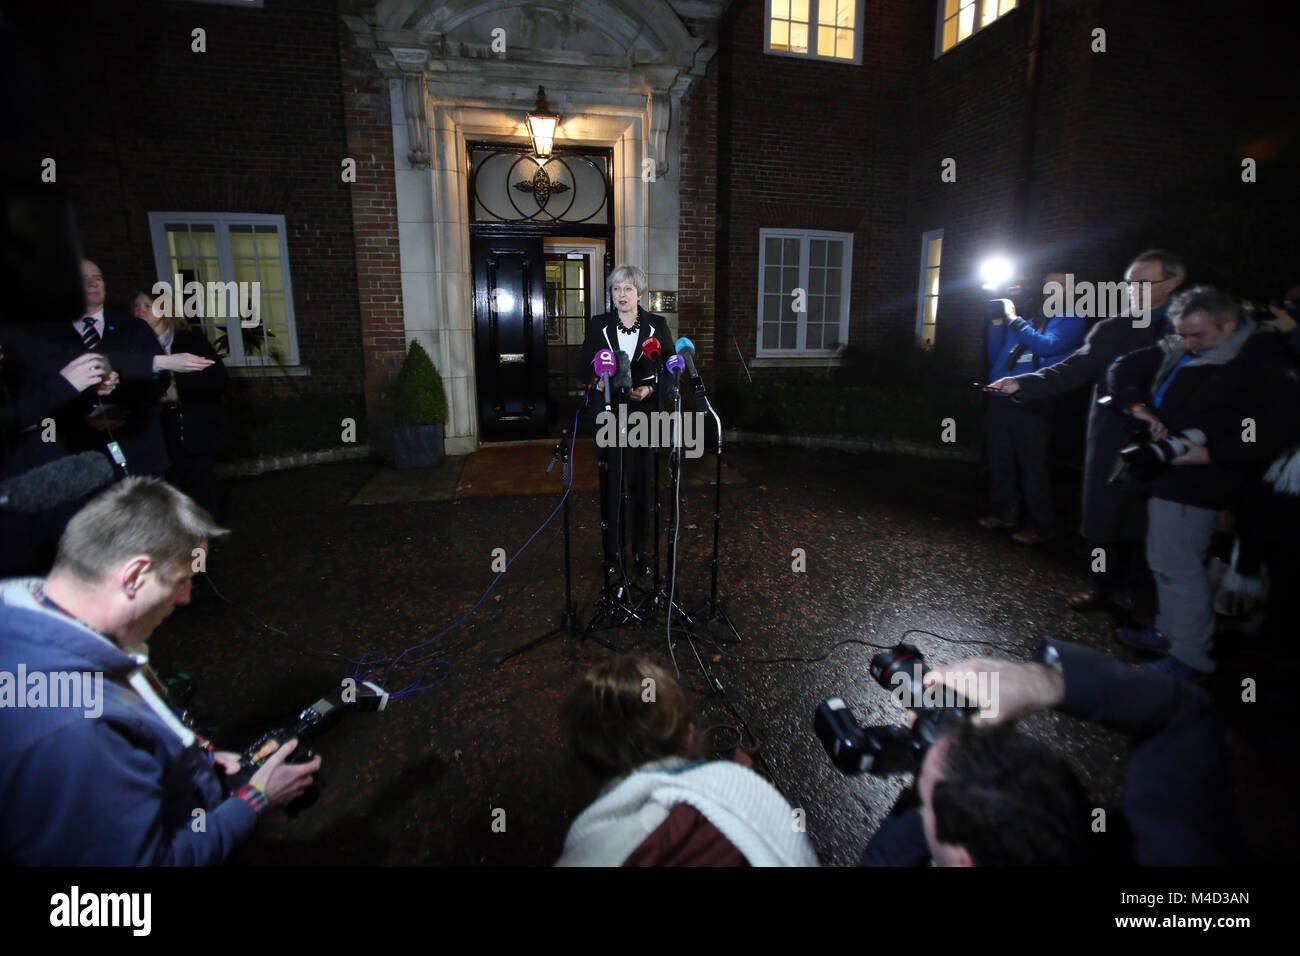 British Prime Minister Theresa May speaks to the media at Stormont,  Belfast, Monday, Feb 12th, 2018. Britain's Prime Minister Theresa May and Irish Prime Minister Leo Varadkar are to visit Belfast later for talks with the Stormont parties. The Prime Ministers left without a deal to restore devolved government. Stock Photo